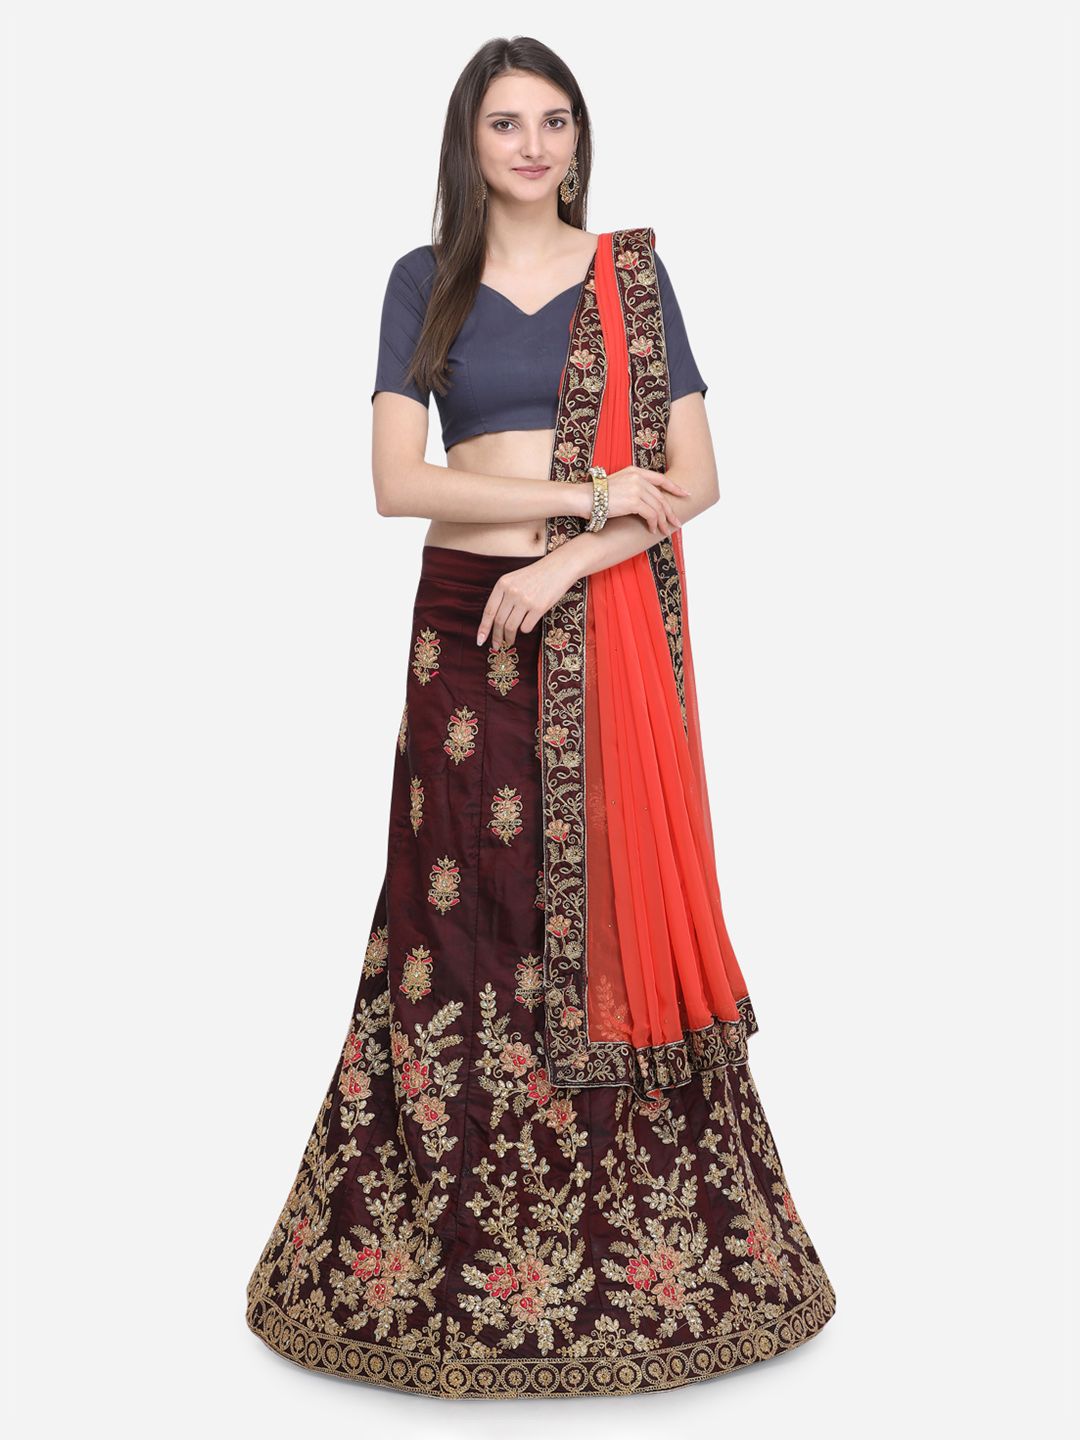 MOKSHA DESIGNS Maroon & Coral Embroidered Semi-Stitched Lehenga & Unstitched Blouse with Dupatta Price in India